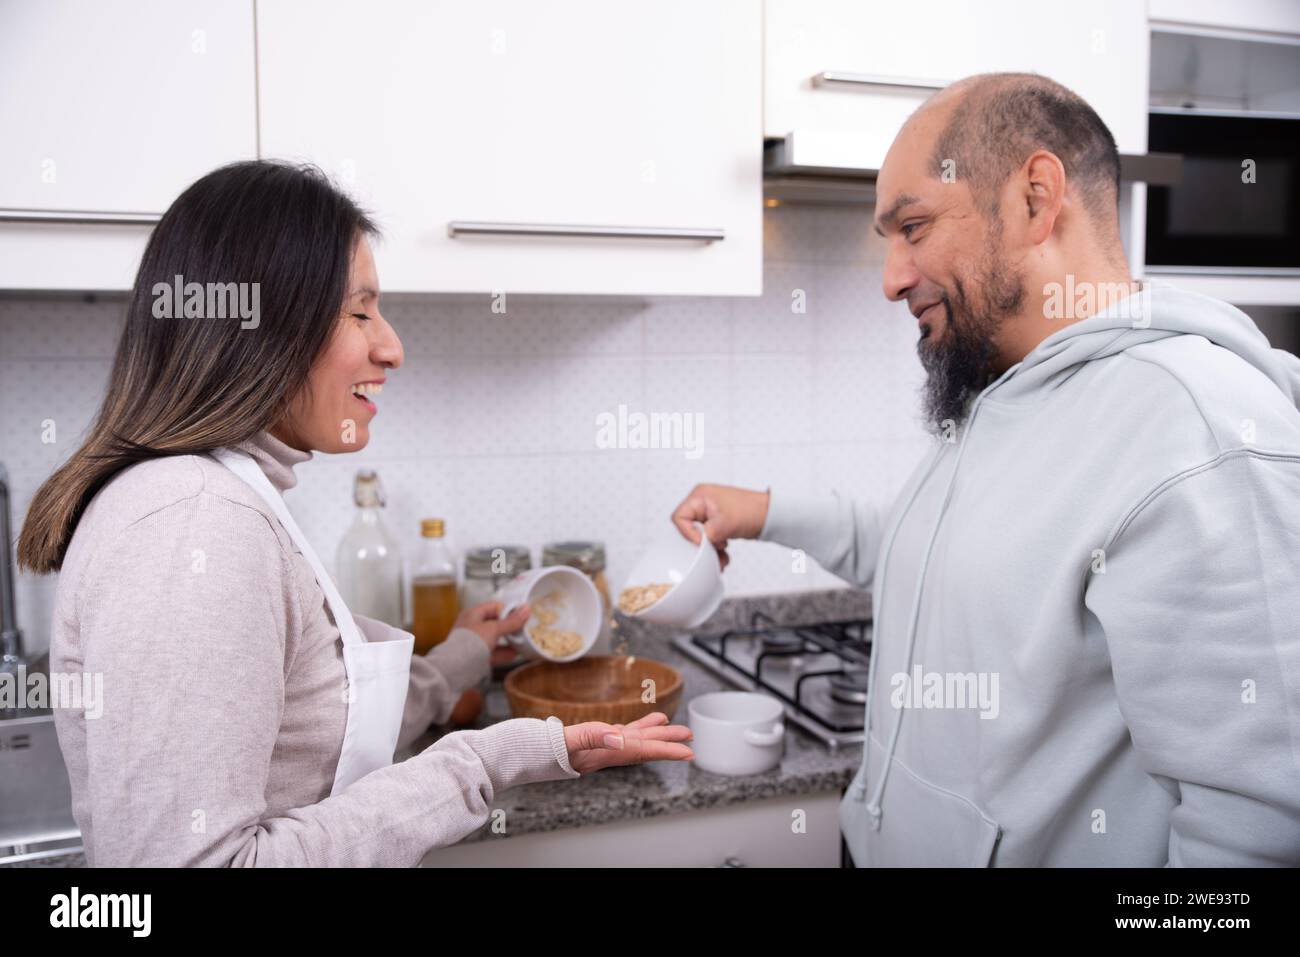 Couple talks and has fun while preparing cookies at home. Stock Photo